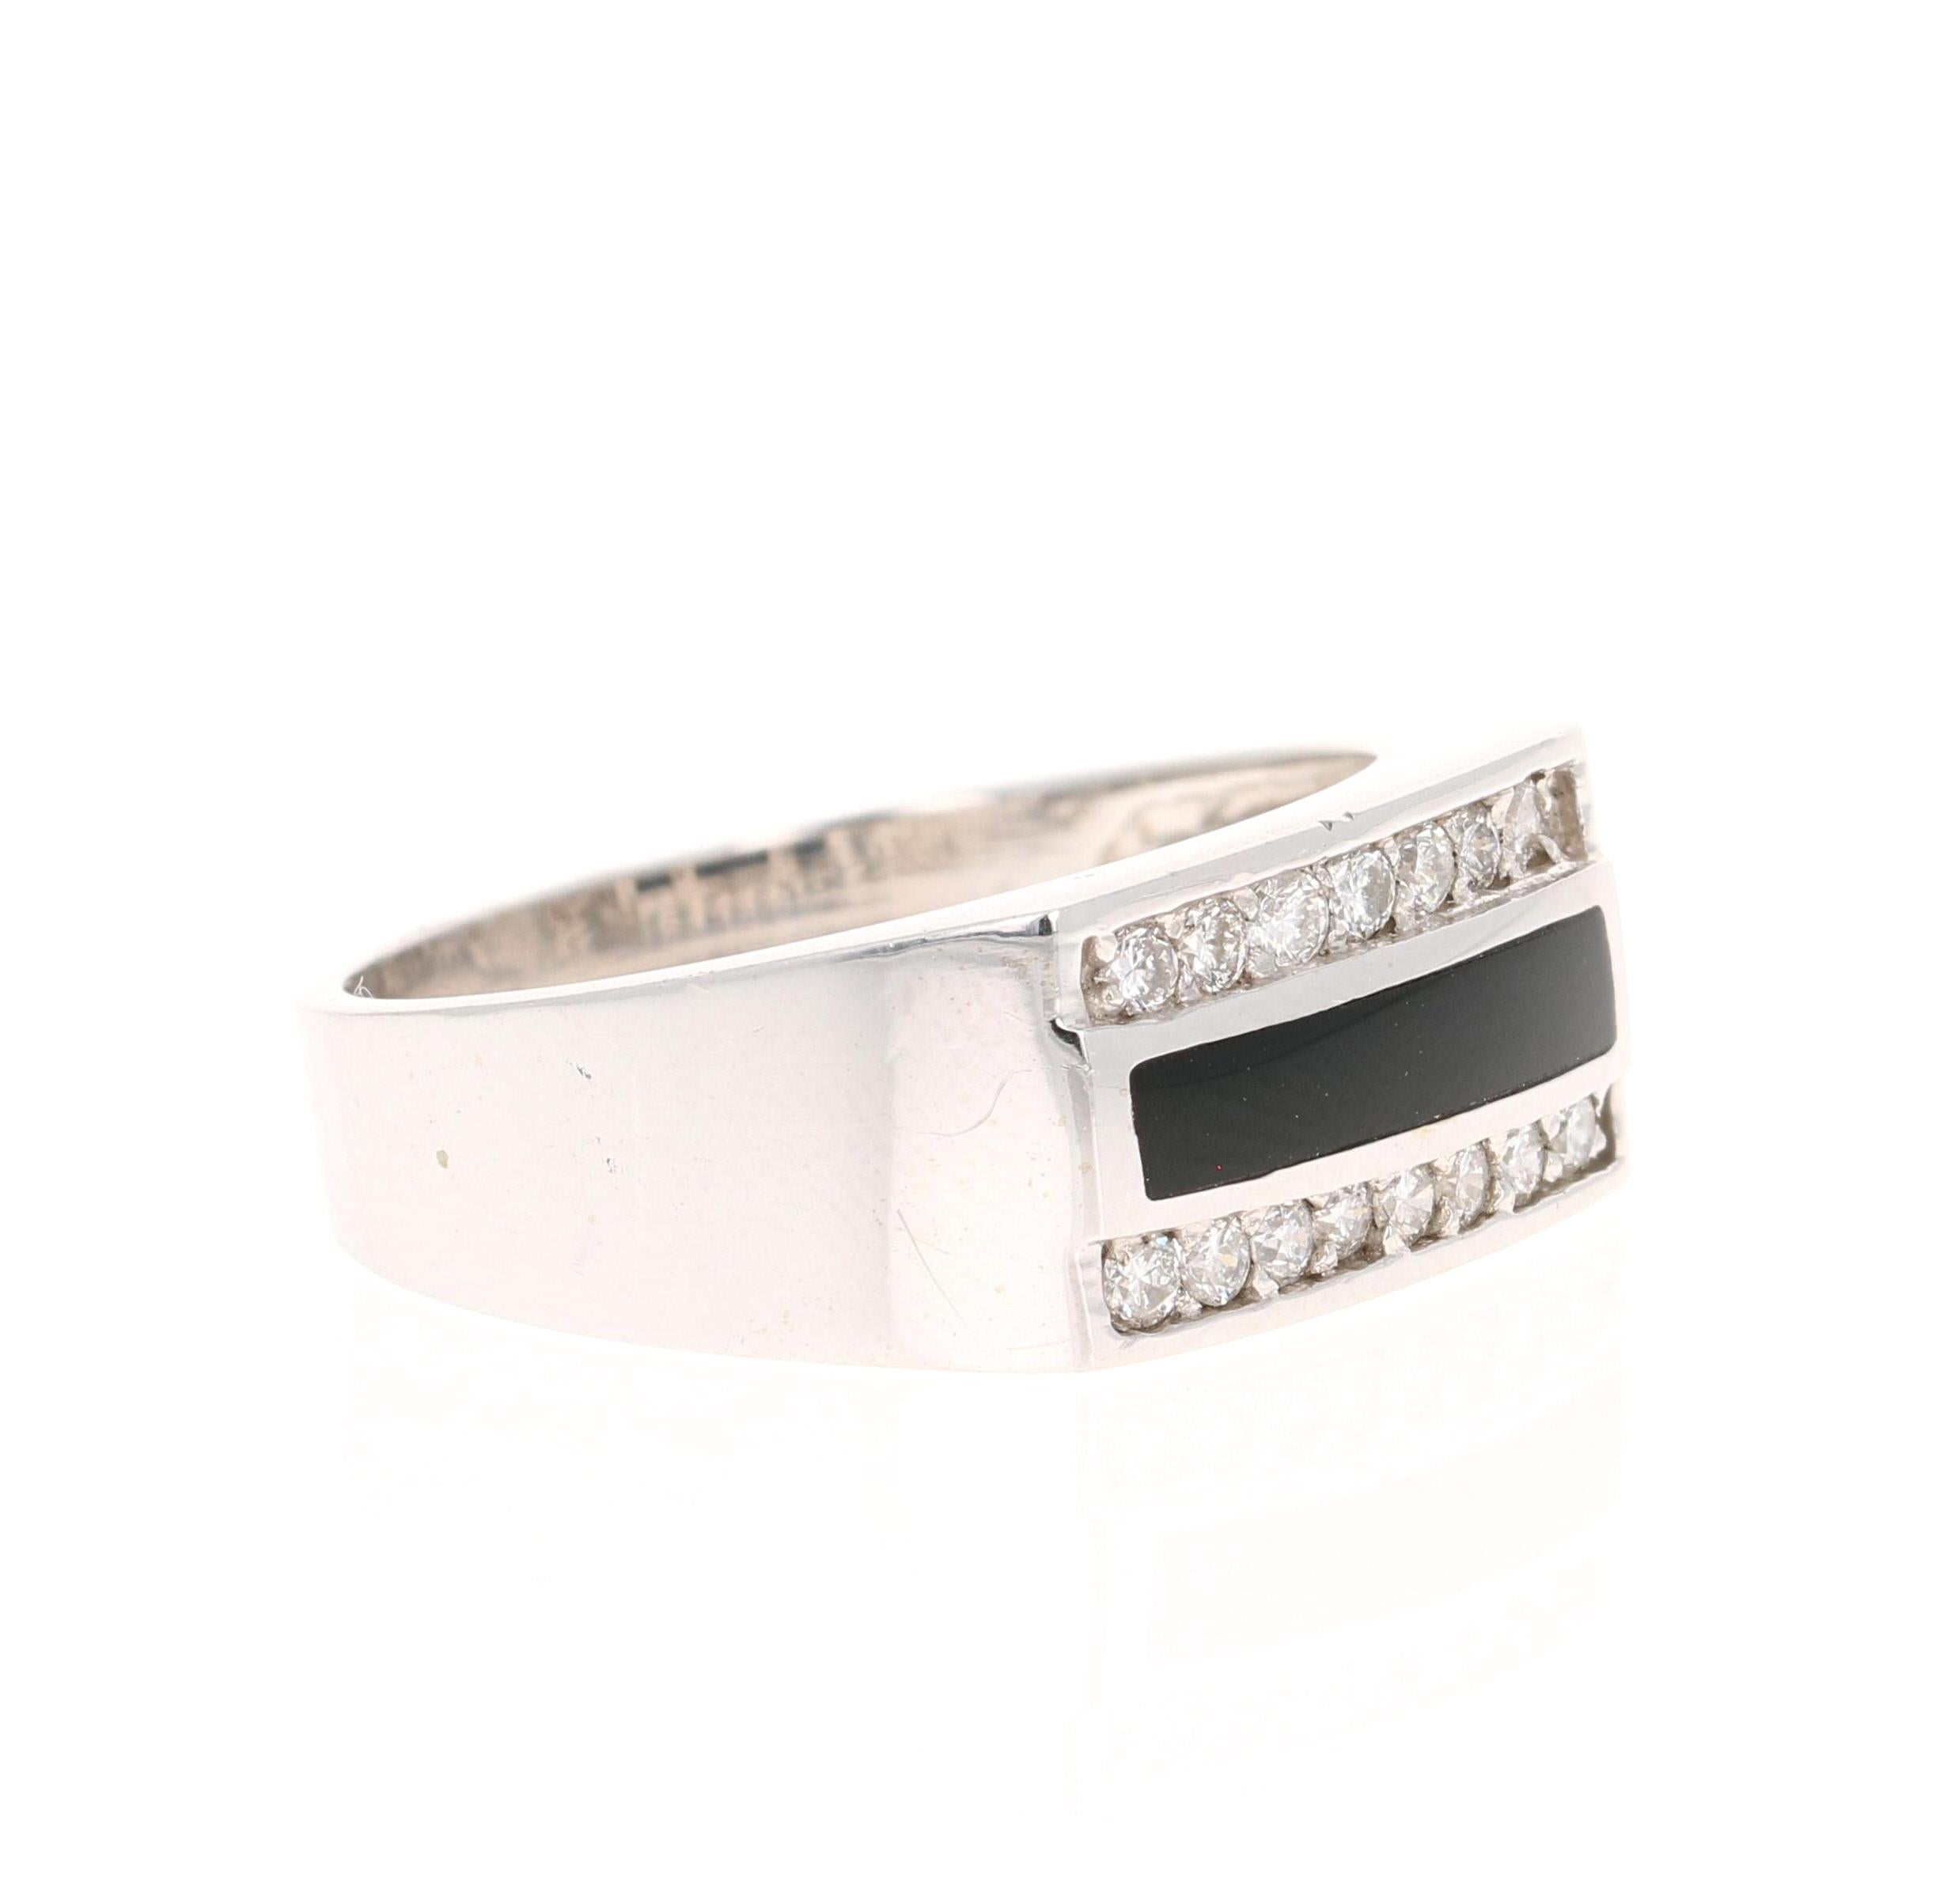 This ring is set with 15 Round Cut White Diamonds that weight 0. 39 carats and also has Black Onyx imbedded in the middle of the ring. 

It is beautifully curated in 14 Karat White Gold and weighs approximately  6.4 grams. 

The ring is a size 10